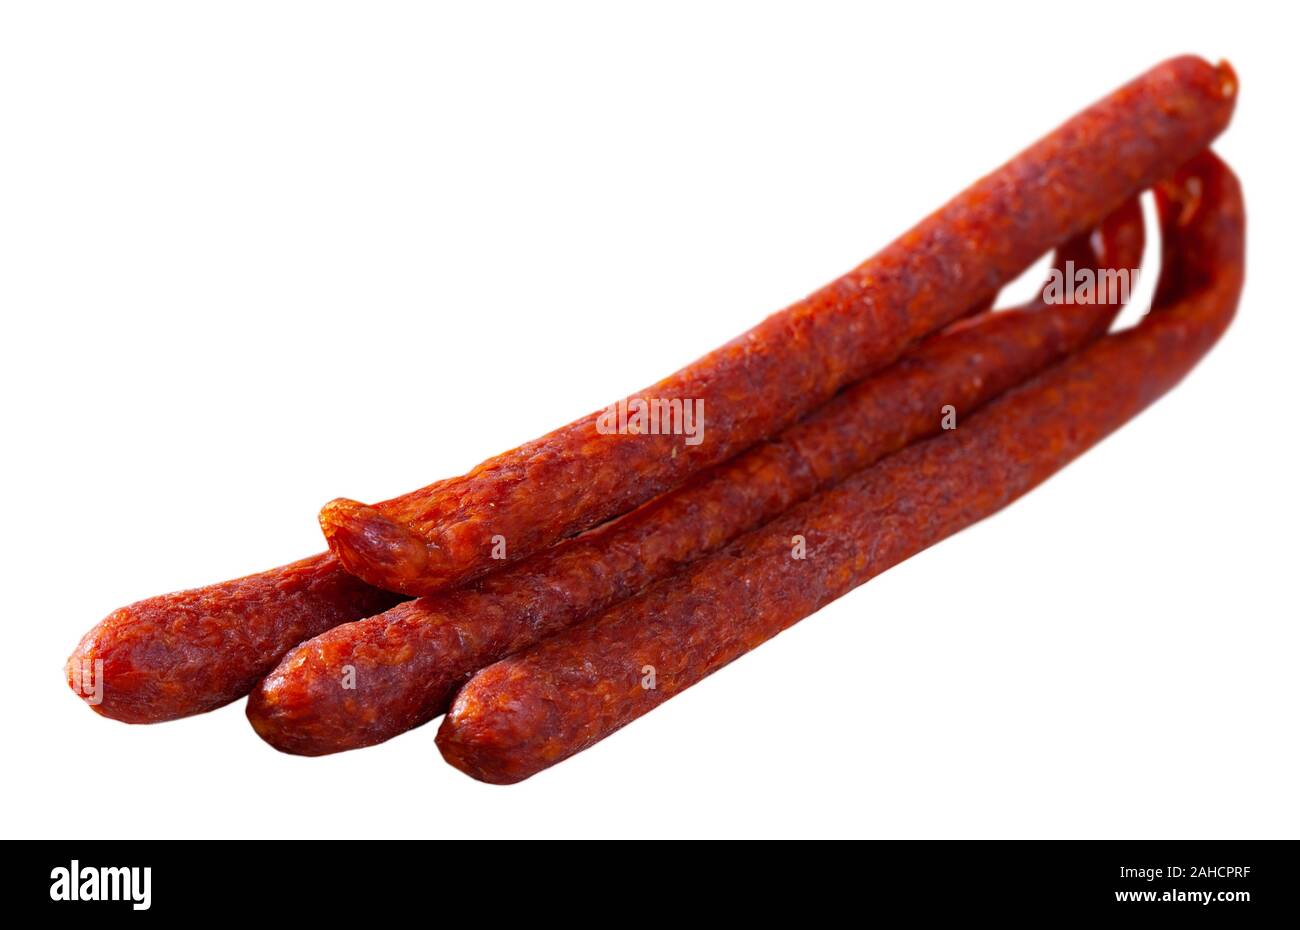 Appetizing Czech pork sausages traditionally smoked with cold smoke from aged beech. Isolated over white background Stock Photo